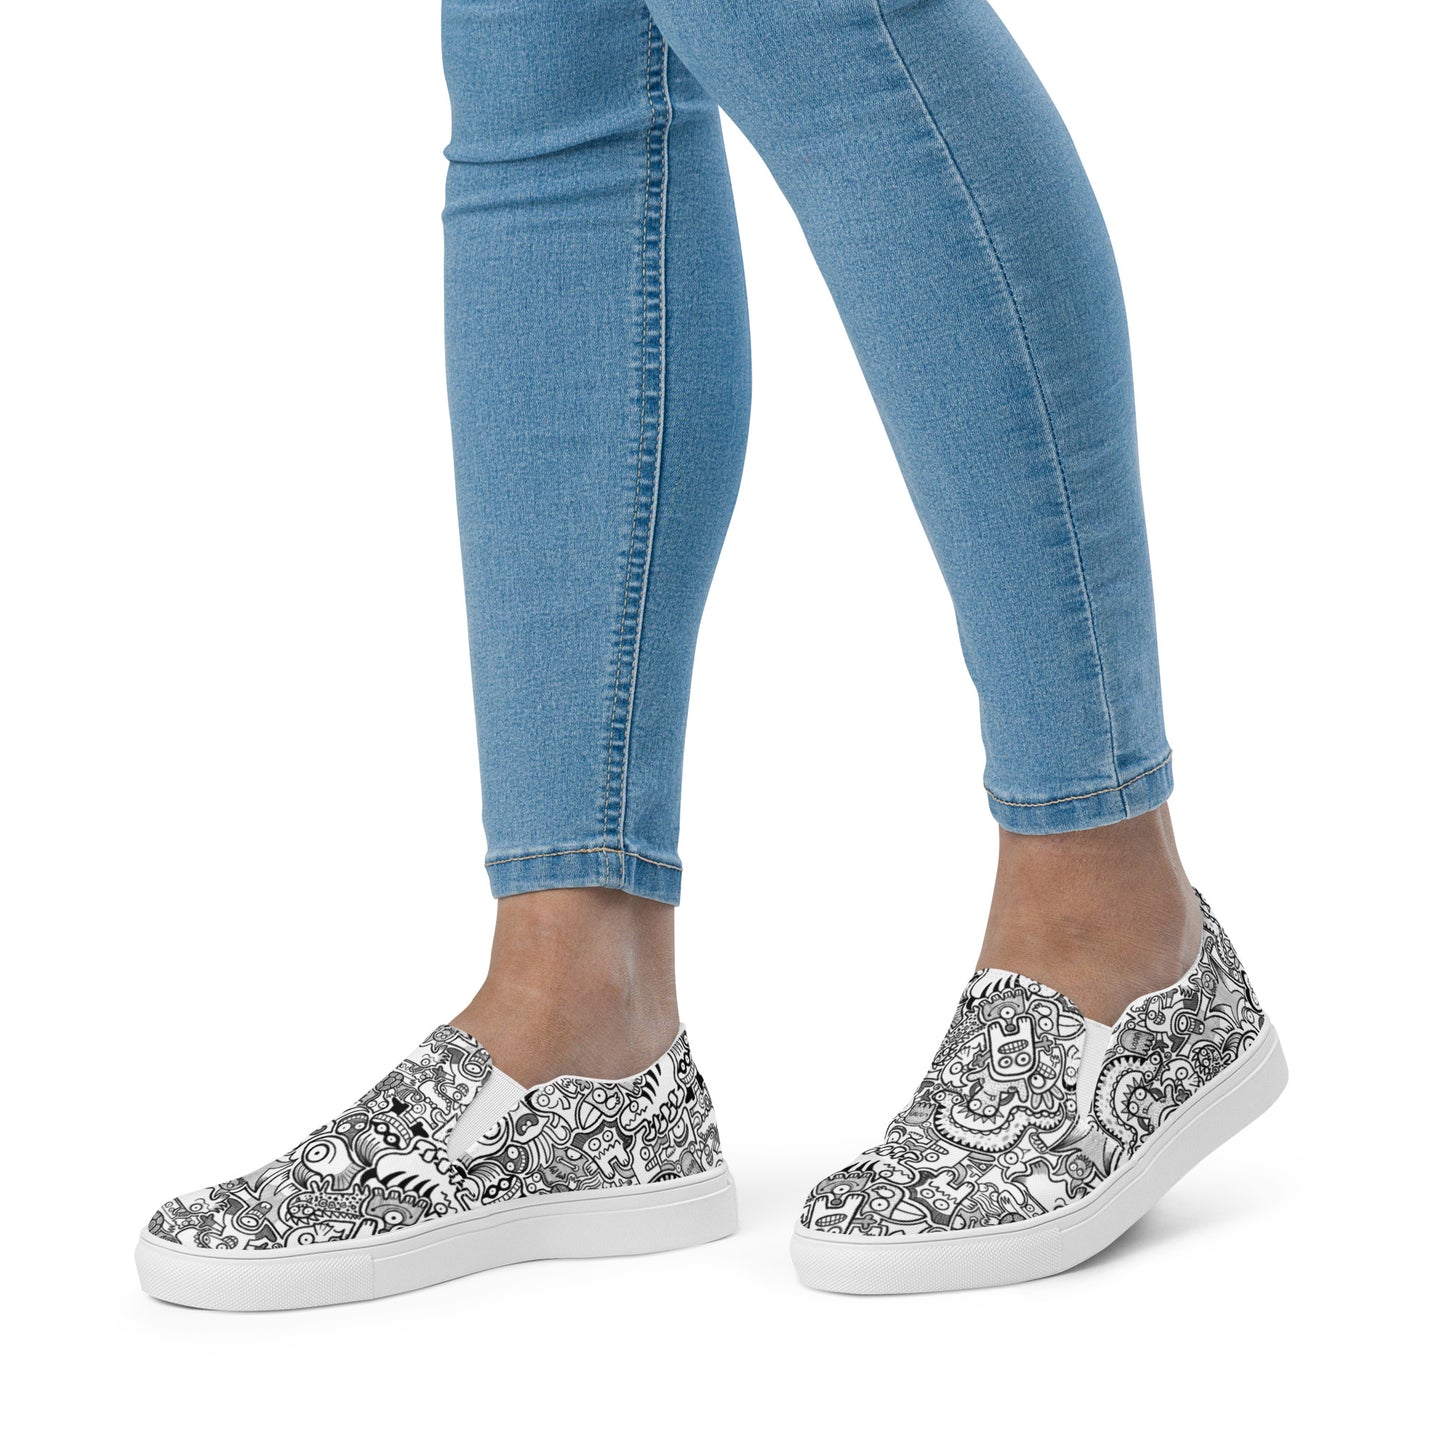 Fill your world with cool doodles Women’s slip-on canvas shoes. Lifestyle